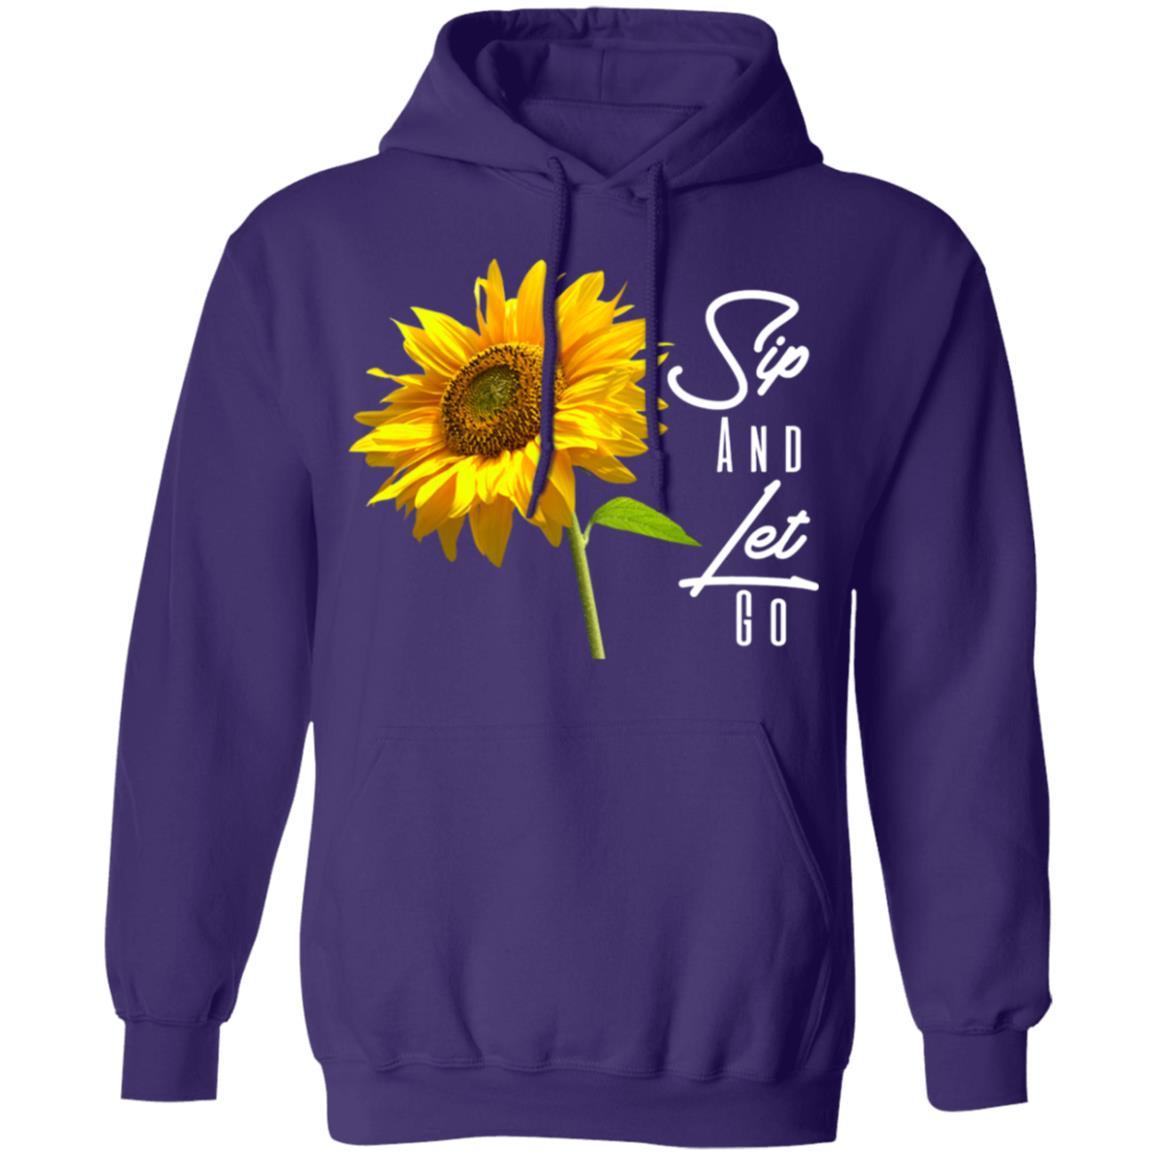 Sip And Let Go Pullover Hoodie Purple - Loyalty Vibes